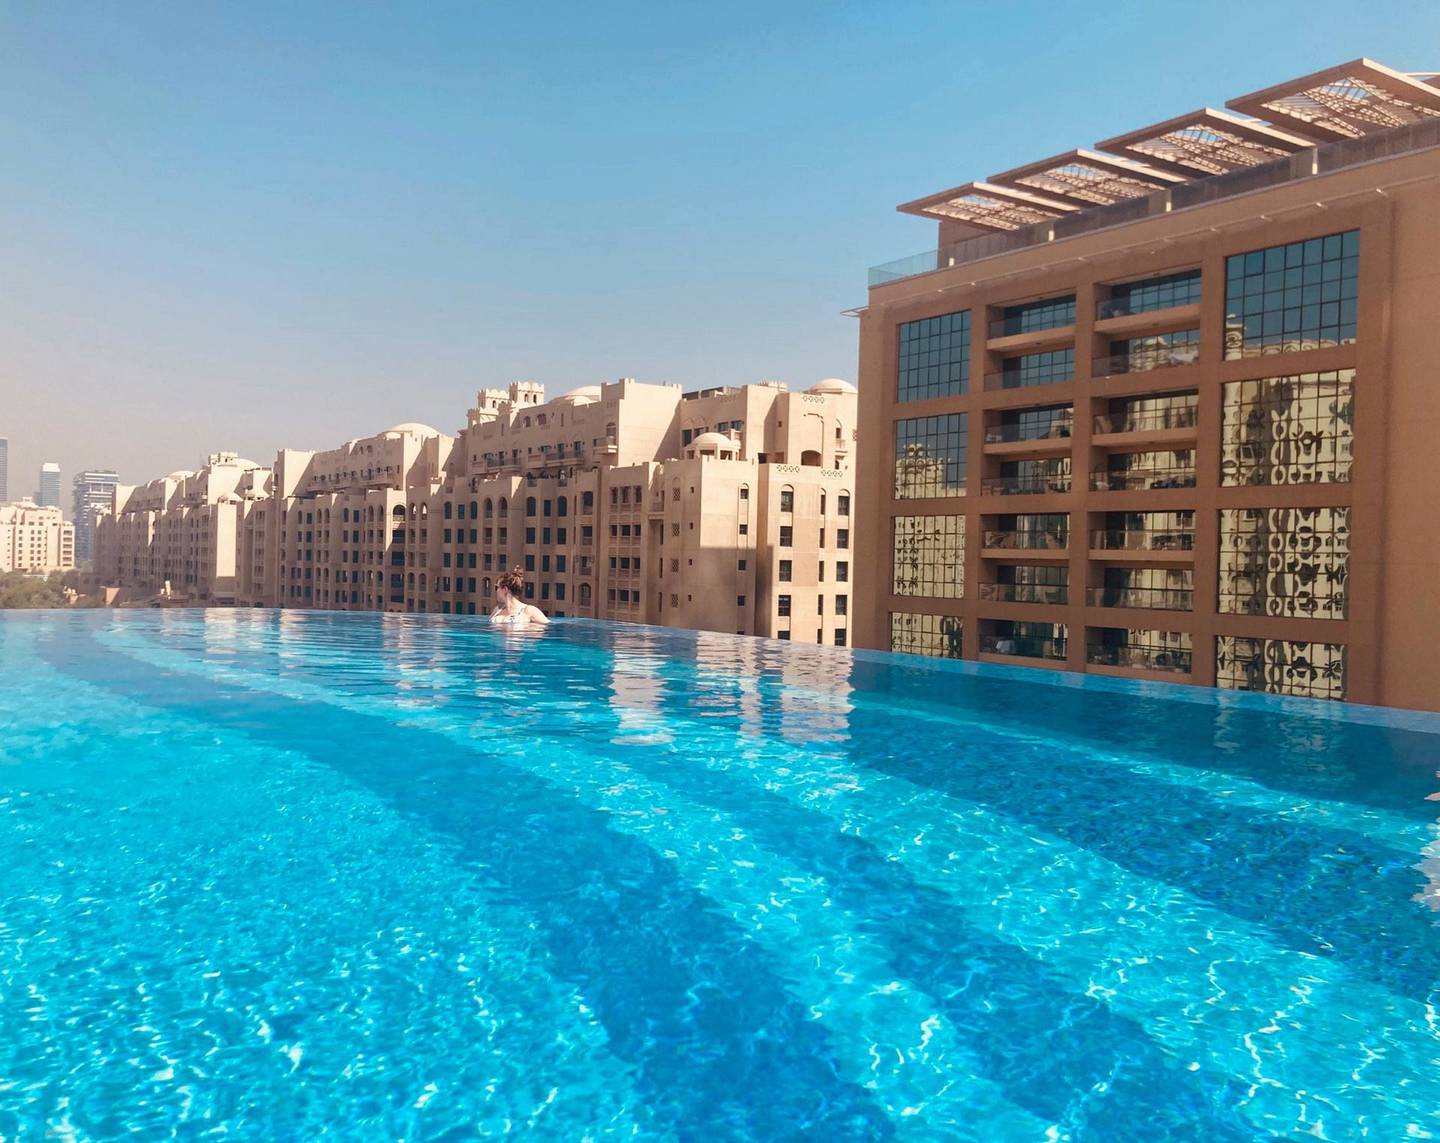 The adult infinity pool at The St Regis Dubai, The Palm. The National